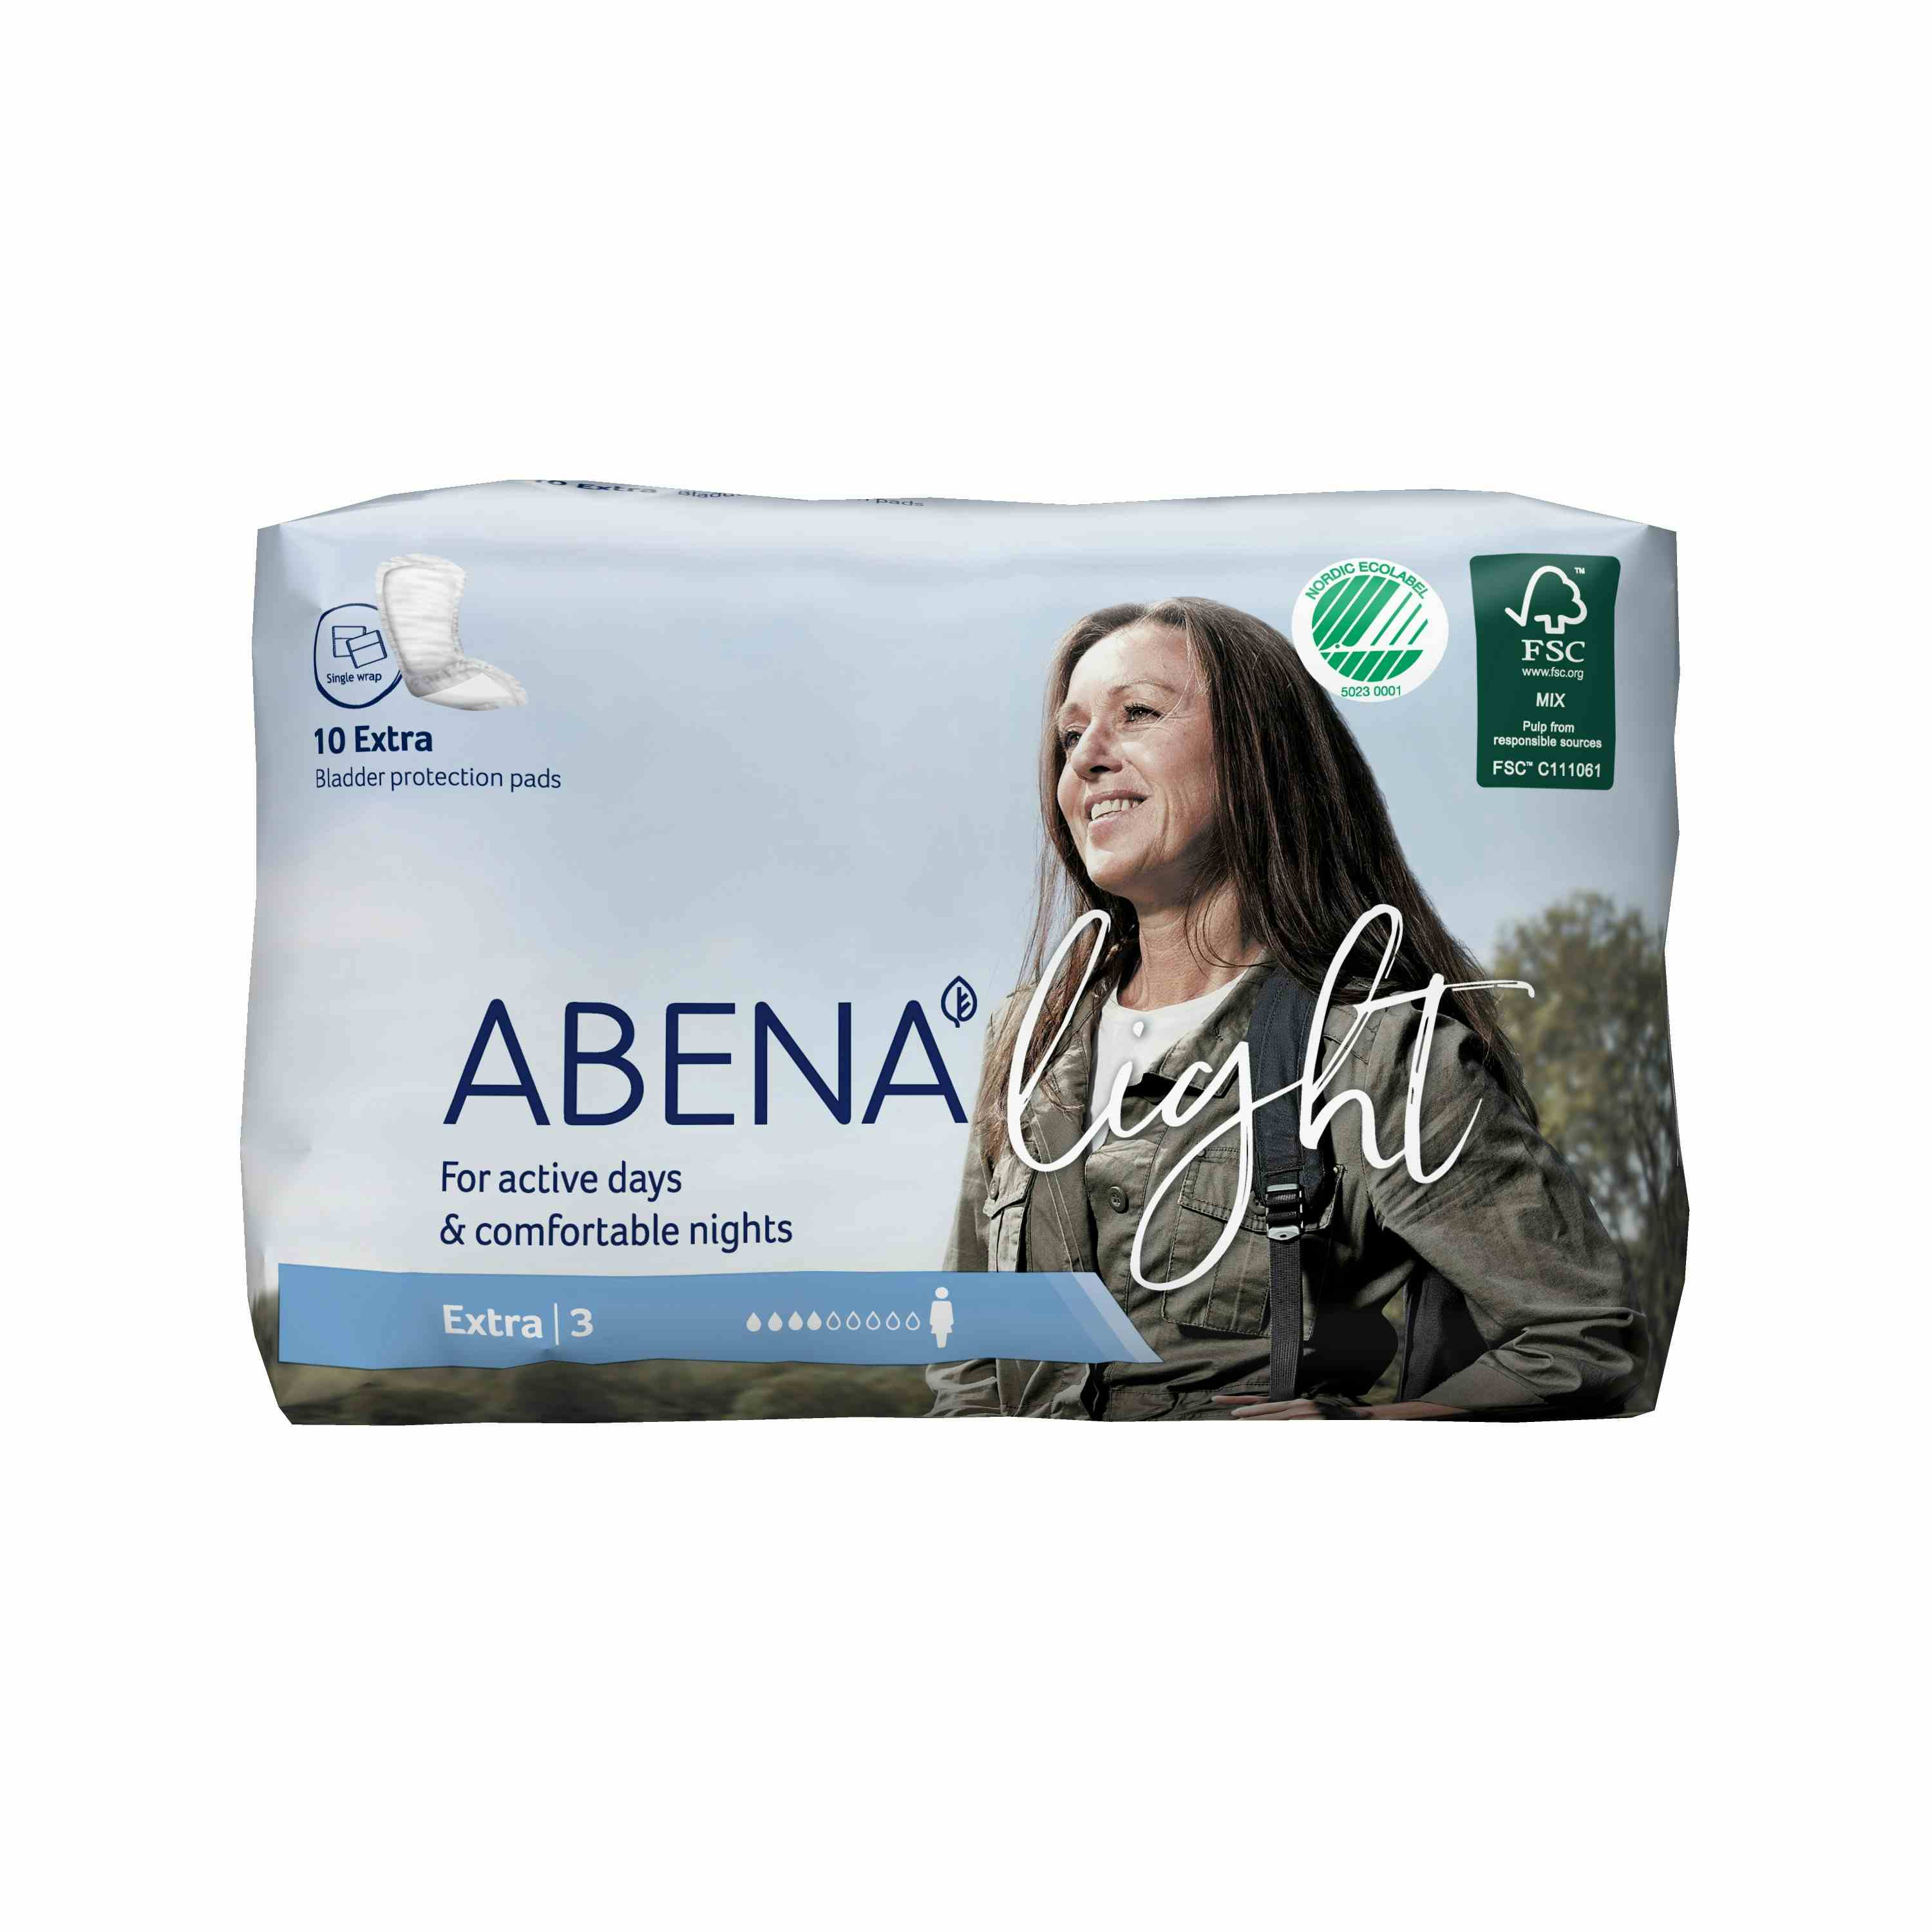 Abena Light Extra Disposable Unisex Adult Bladder Control Pad, Moderate Absorbency, 1000017158, One Size Fits Most -  Case of 200 Pads (20 Bags)